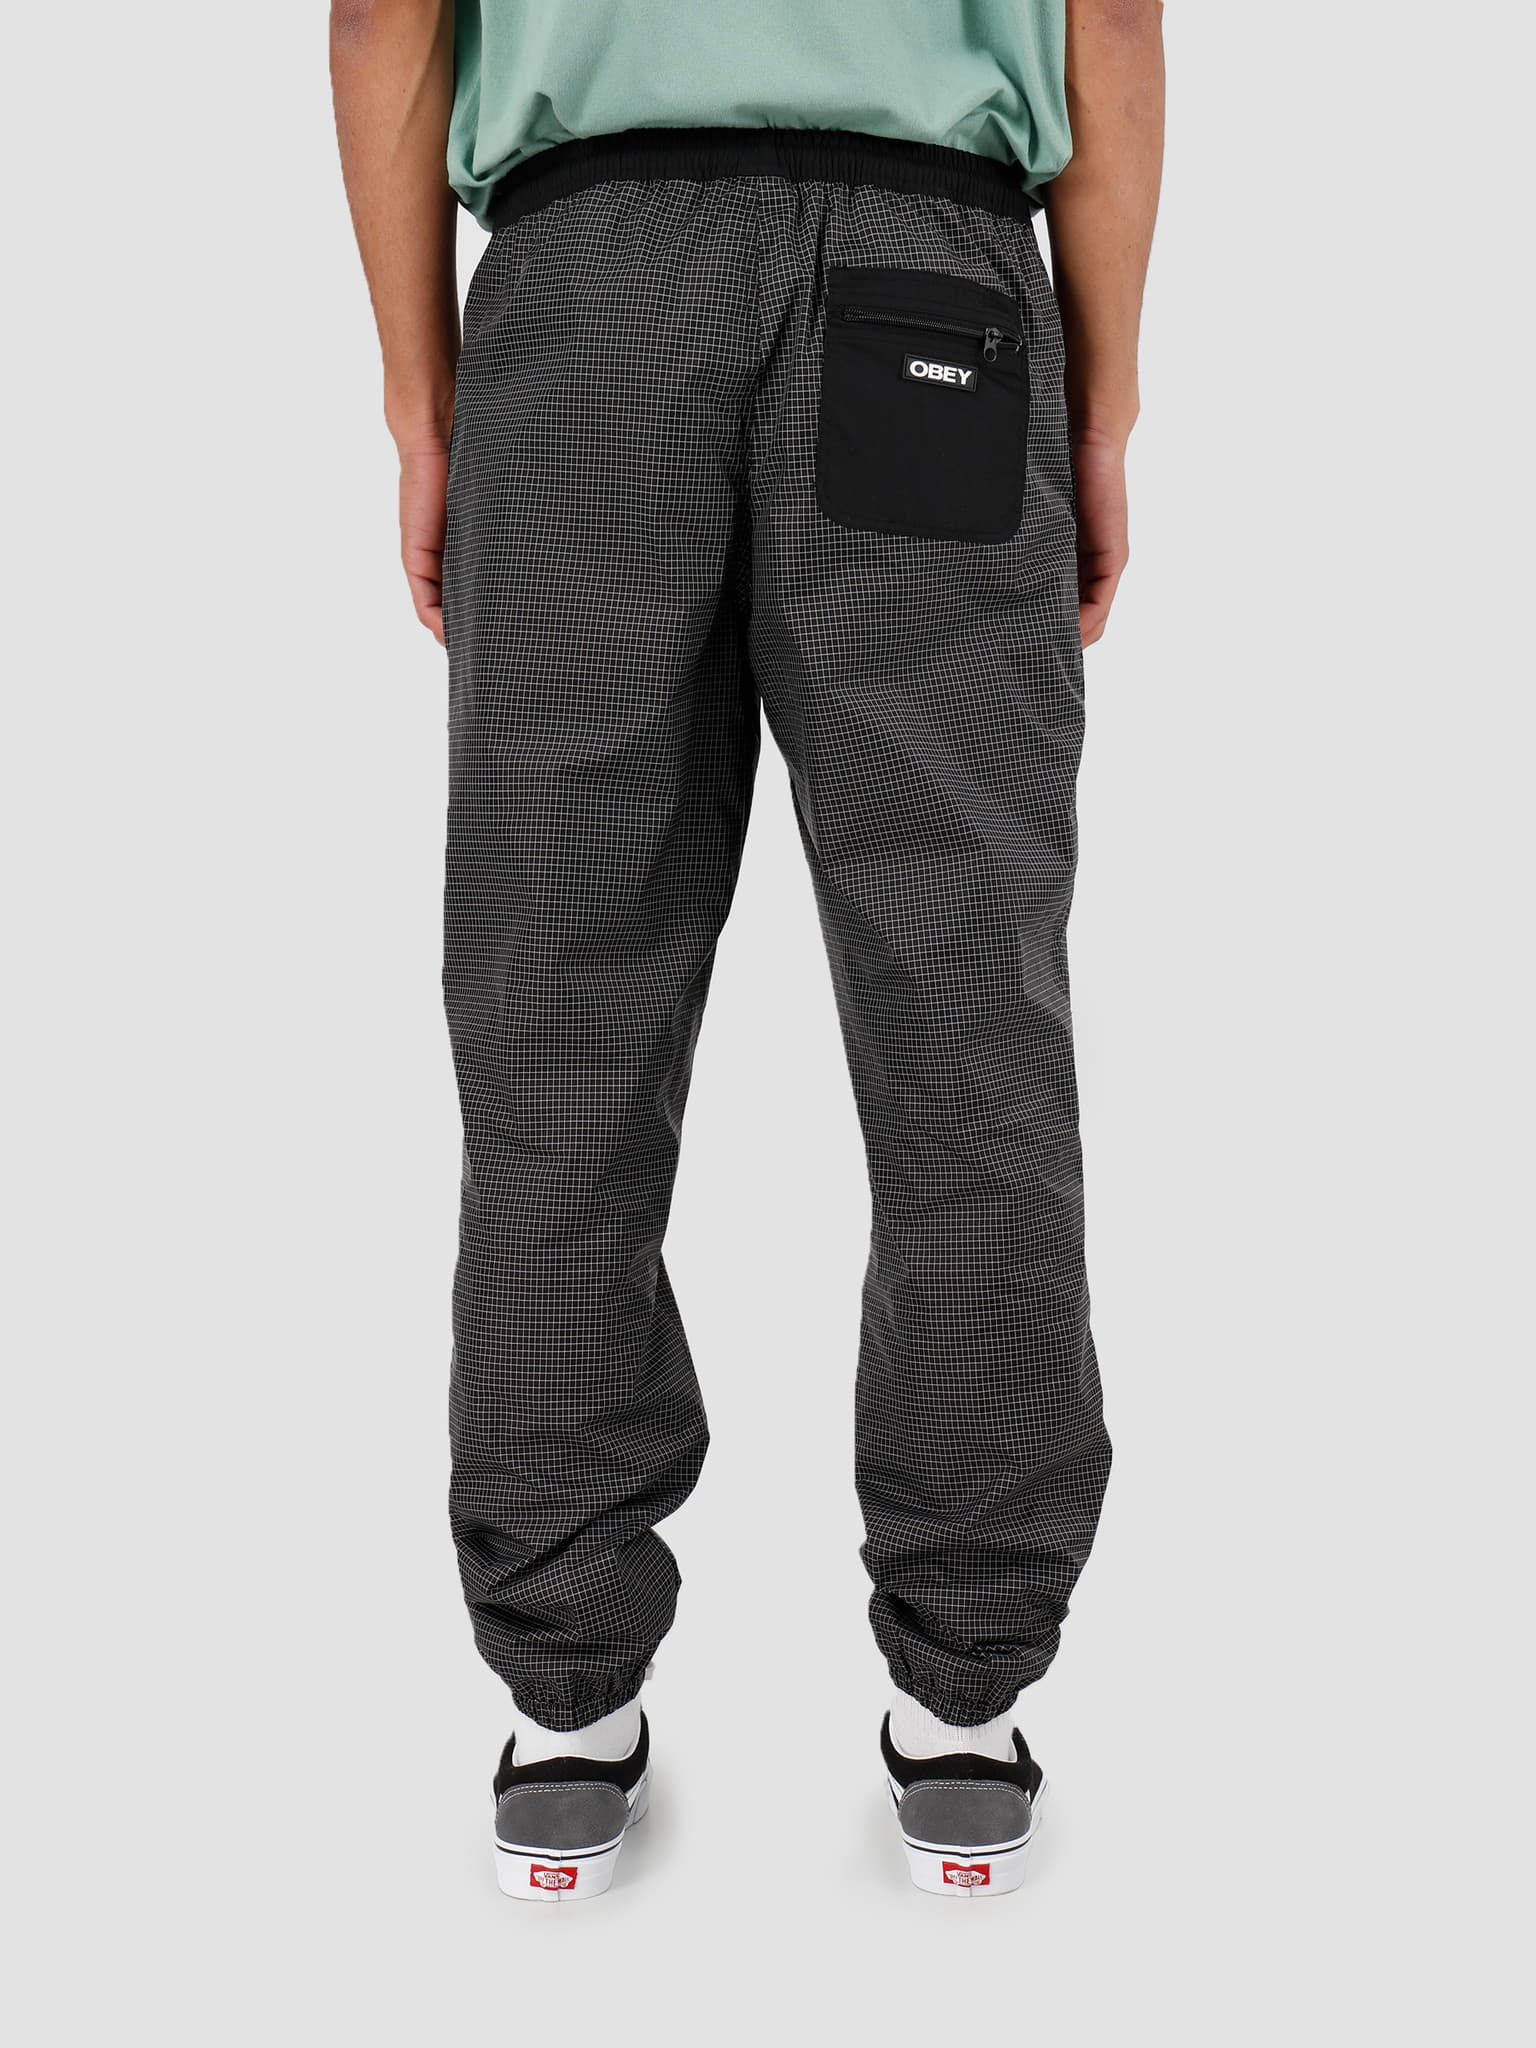 Easy Nore Pant Black 142020144-BLK